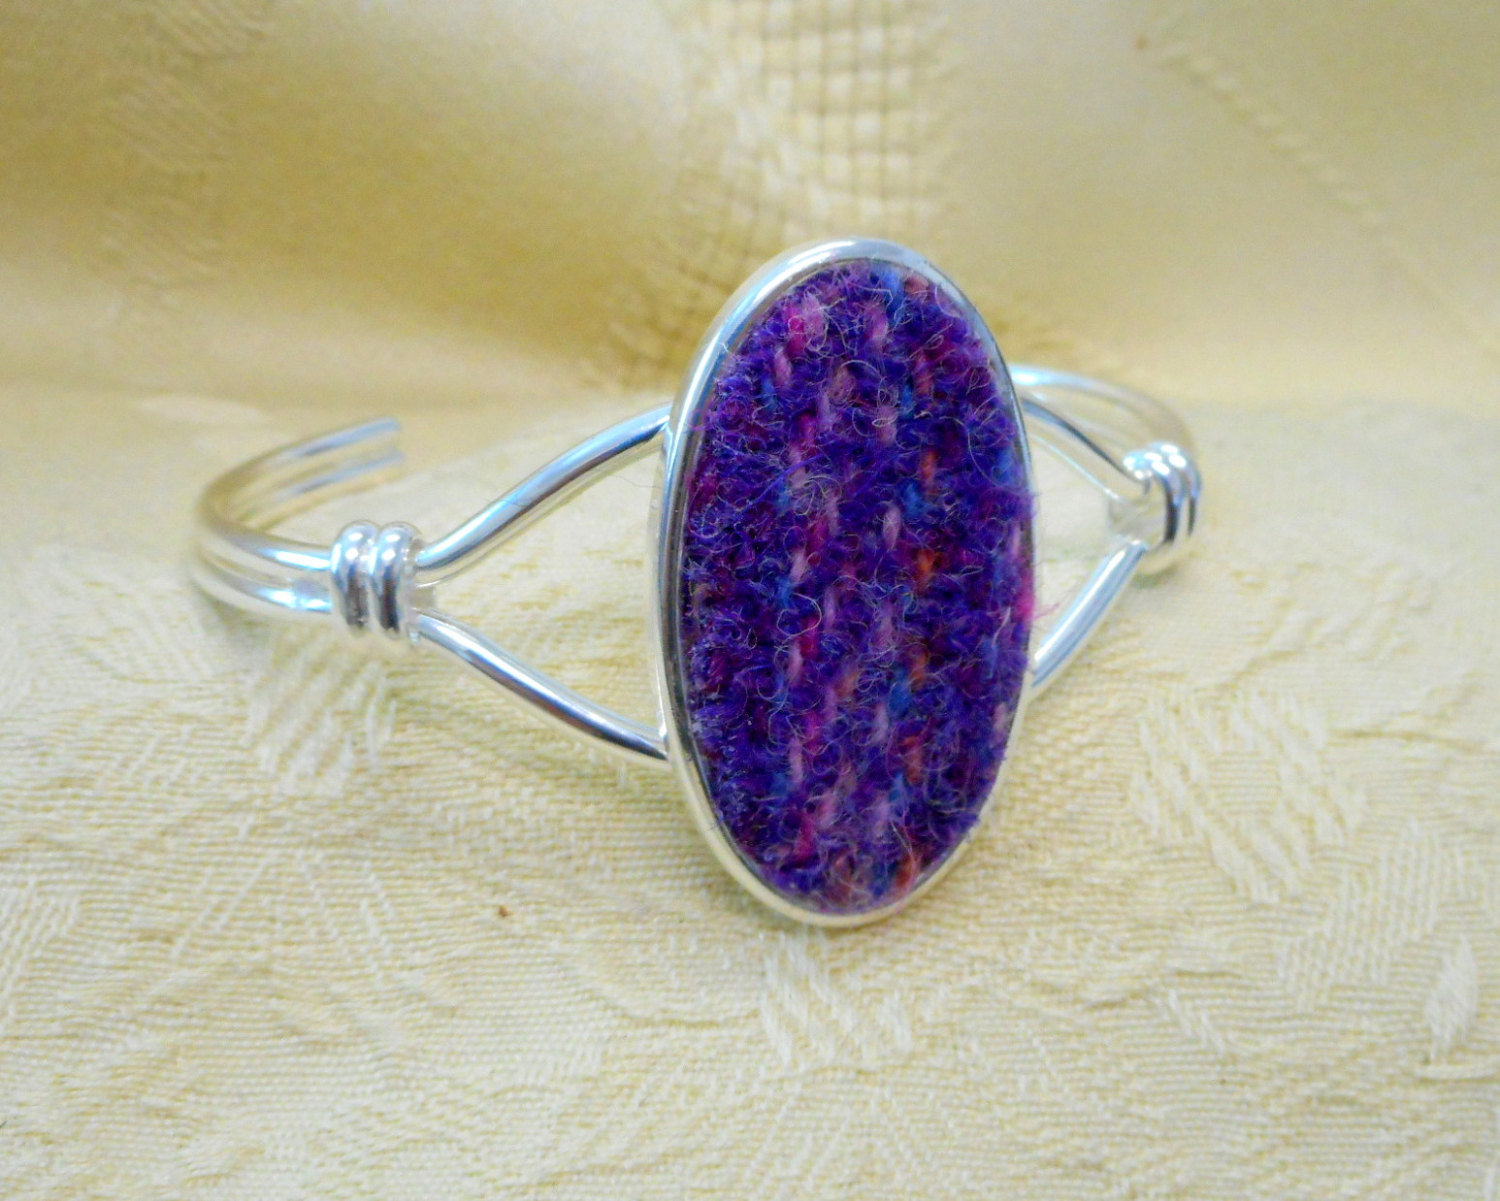 Harris Tweed pink and purple bangle, bracelet made in Scotland womens jewellery christmas birthday or mothers day Scottish gift